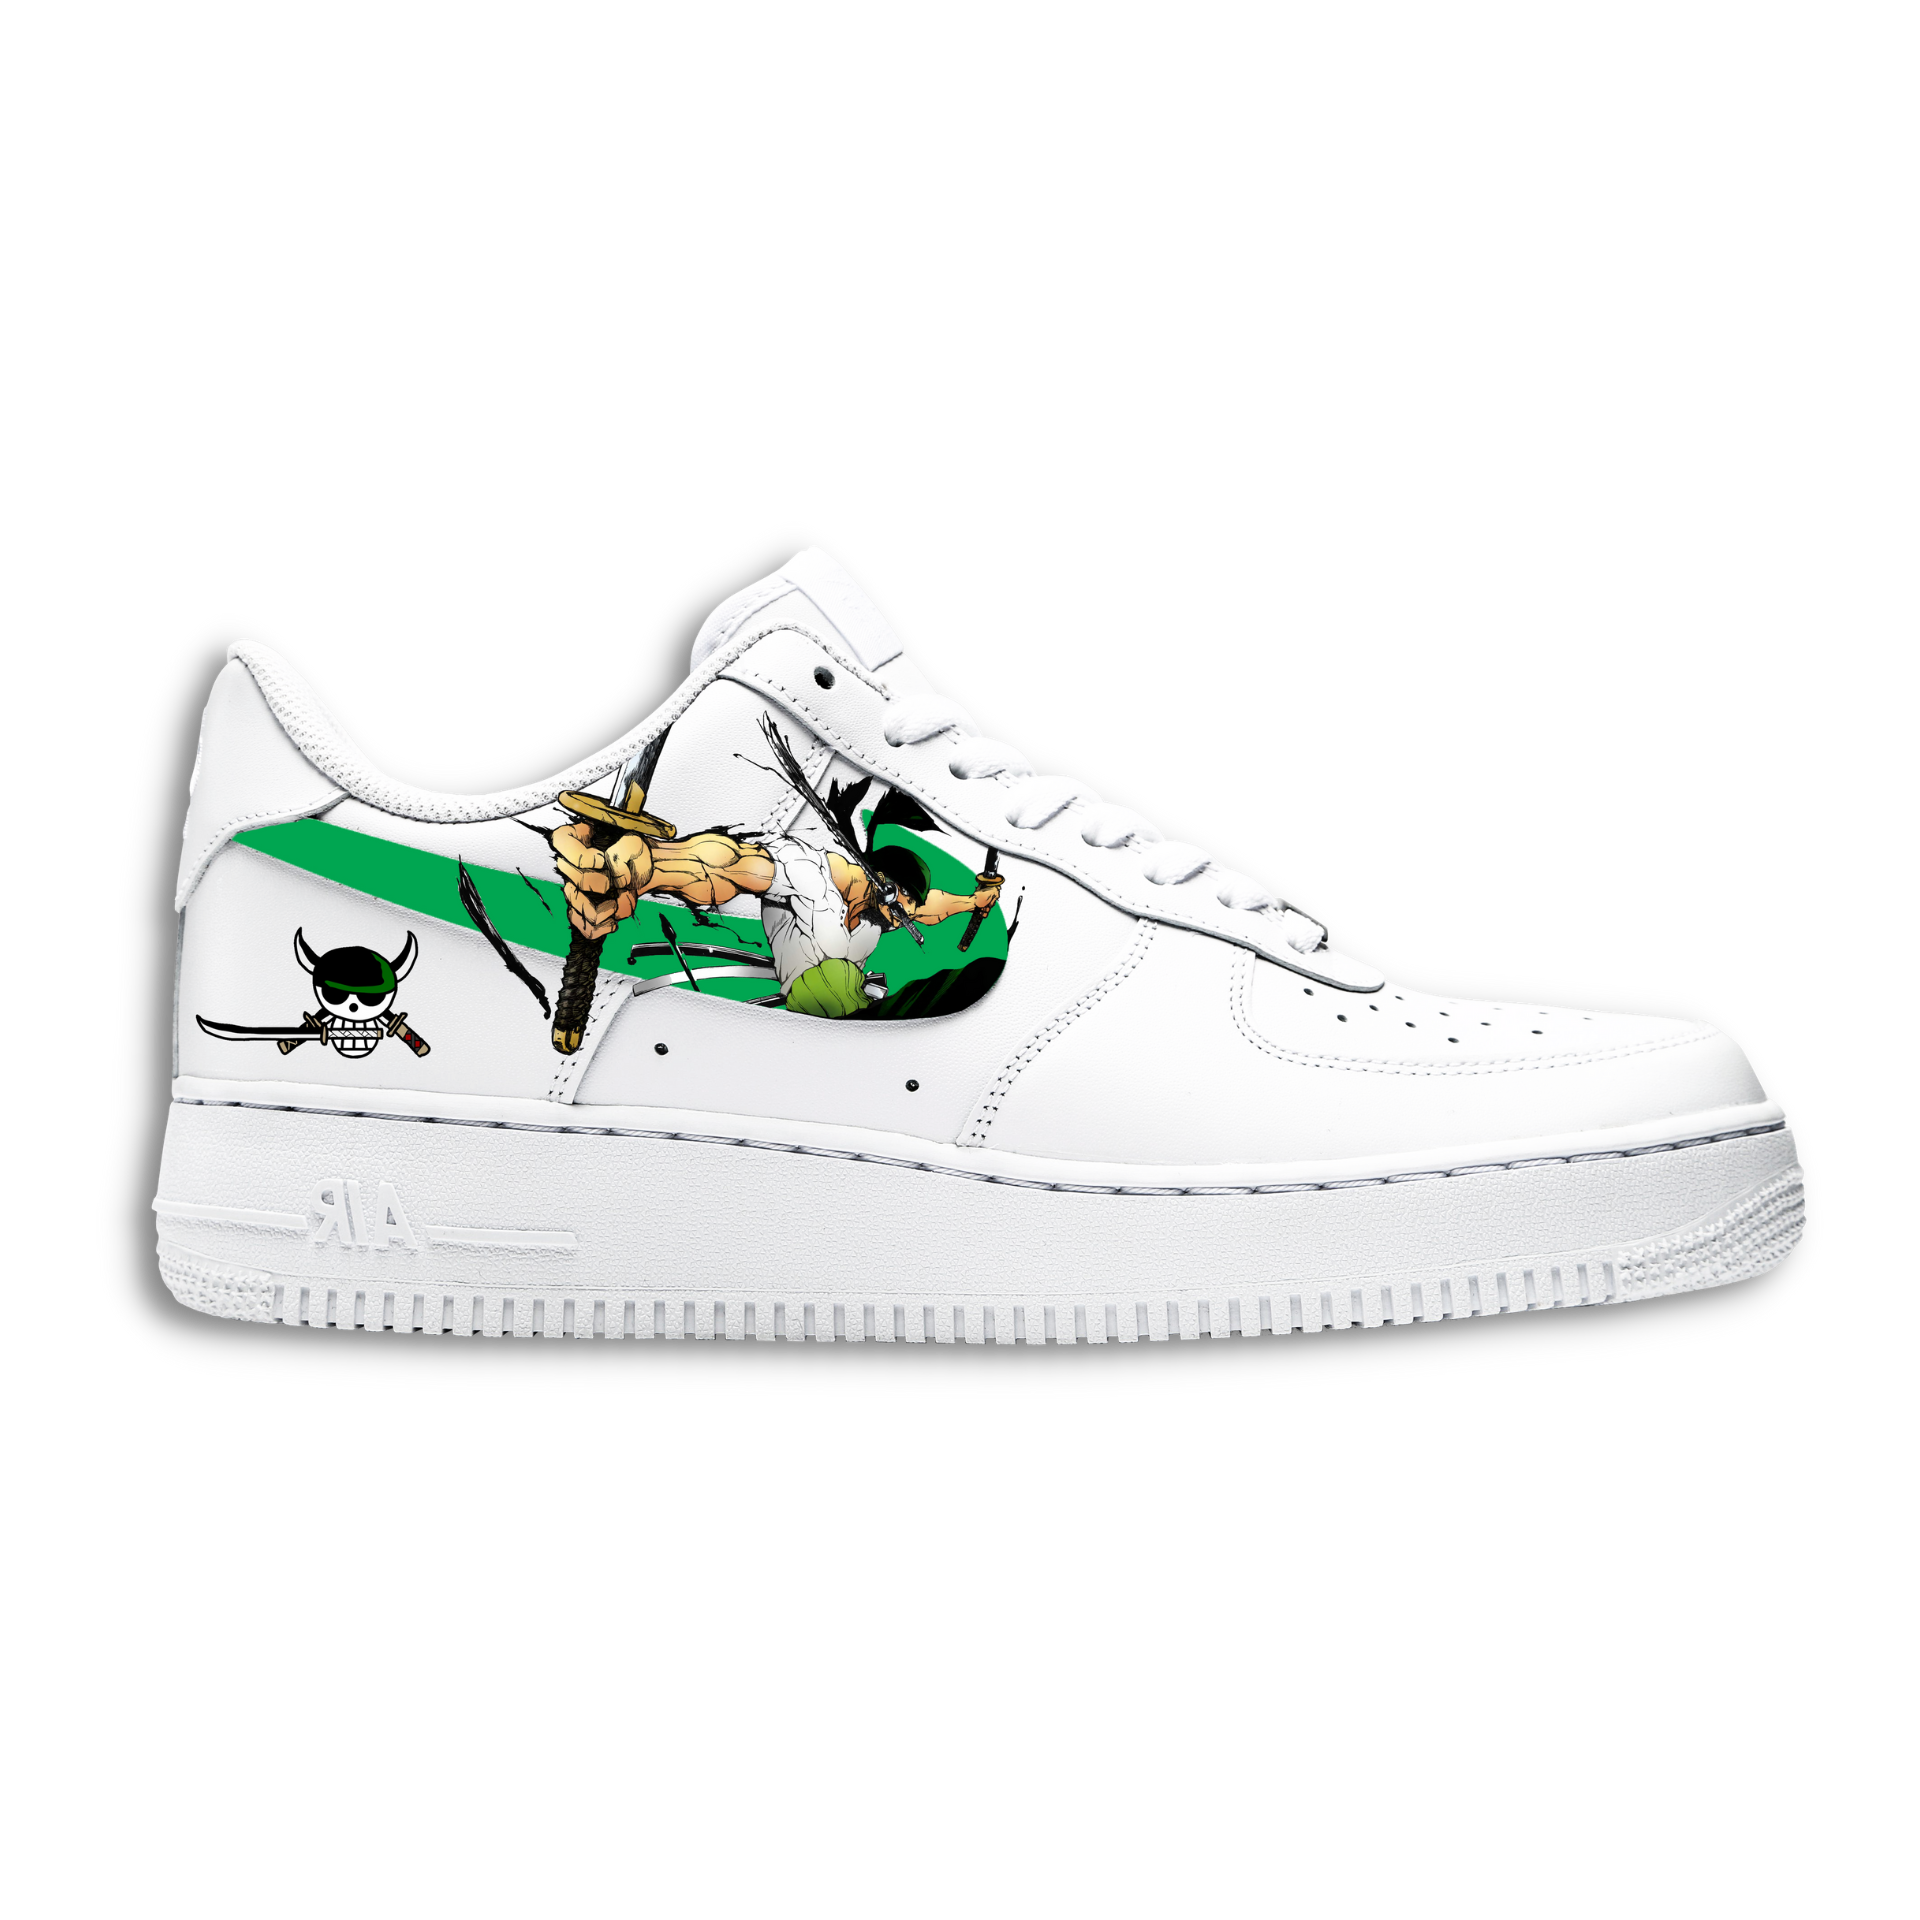 ZORO AF1 SHOES | ONE PIECE | ANIME